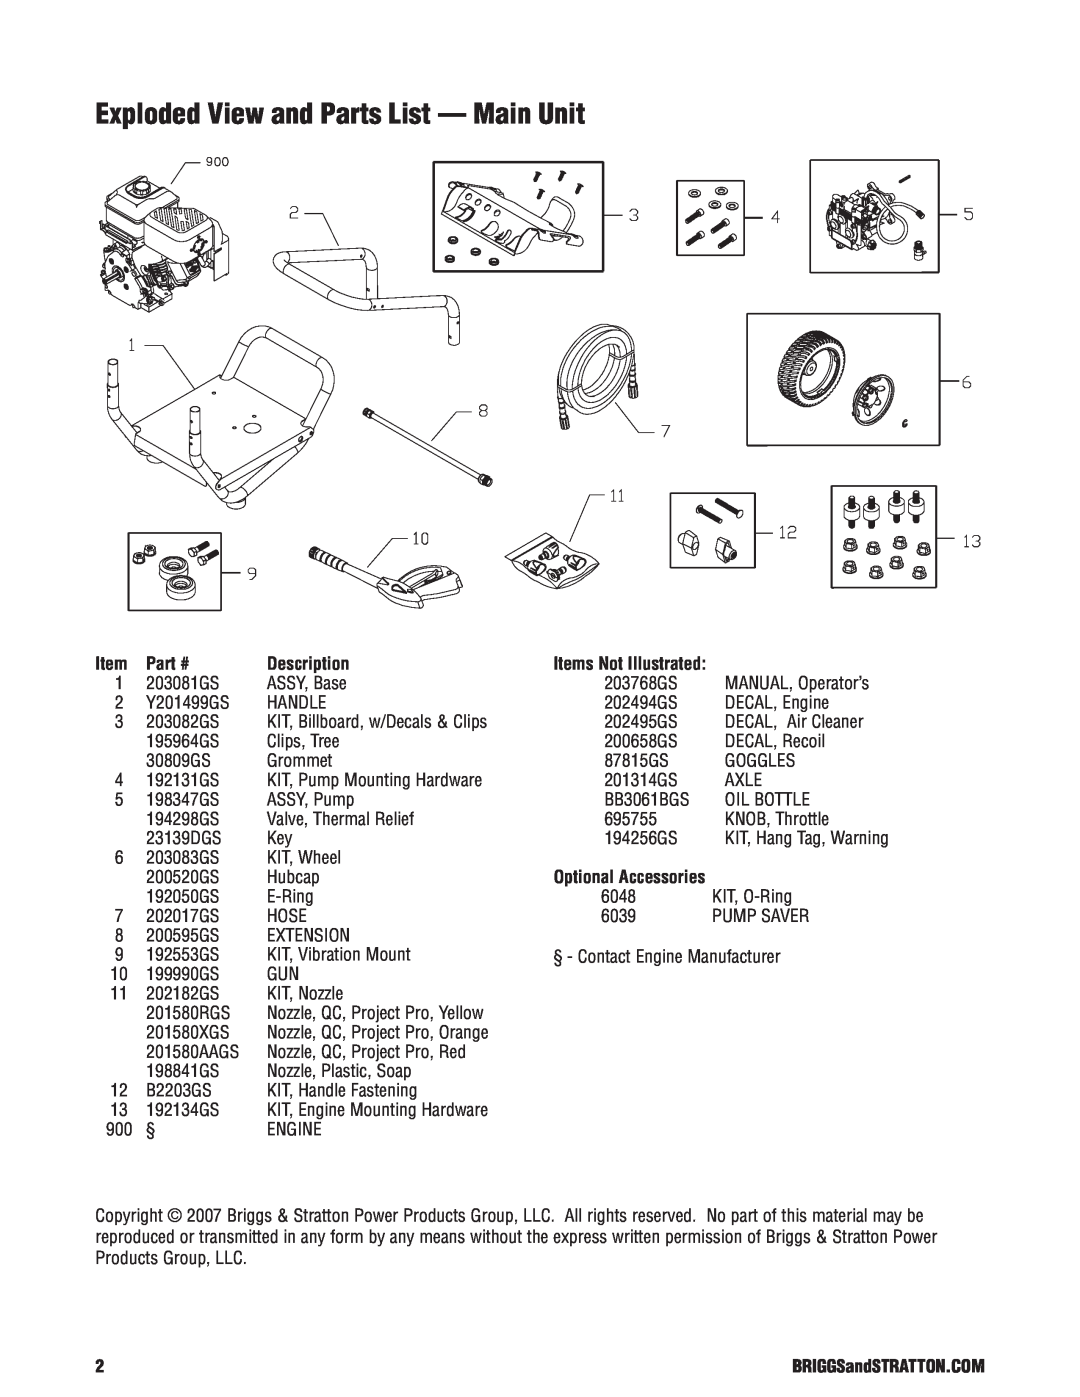 Briggs & Stratton 020274-02 manual Exploded View and Parts List - Main Unit, Description 